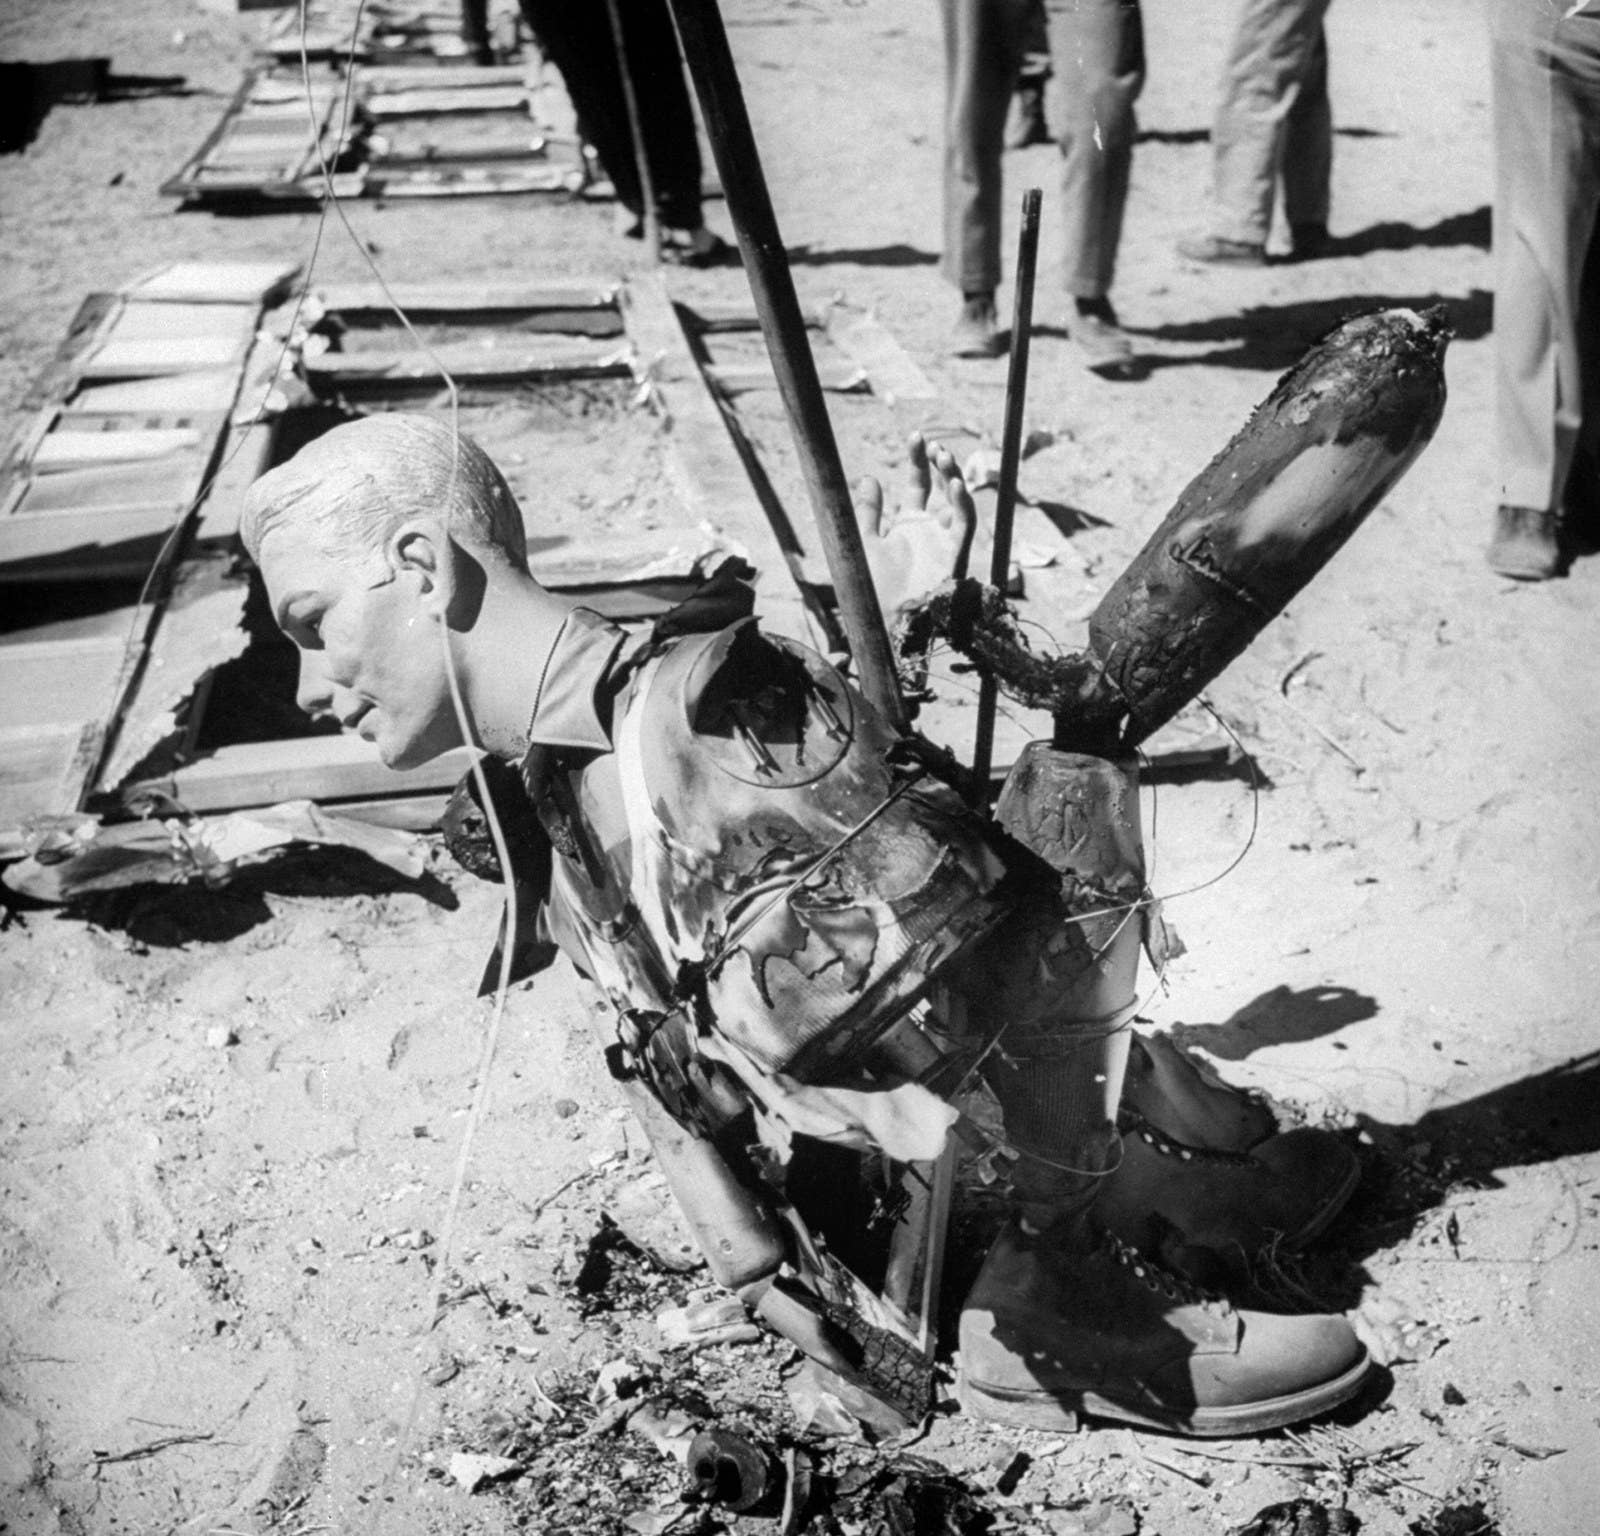 Dummies are used to show the effects of an A-bomb during a test in the desert in 1955.